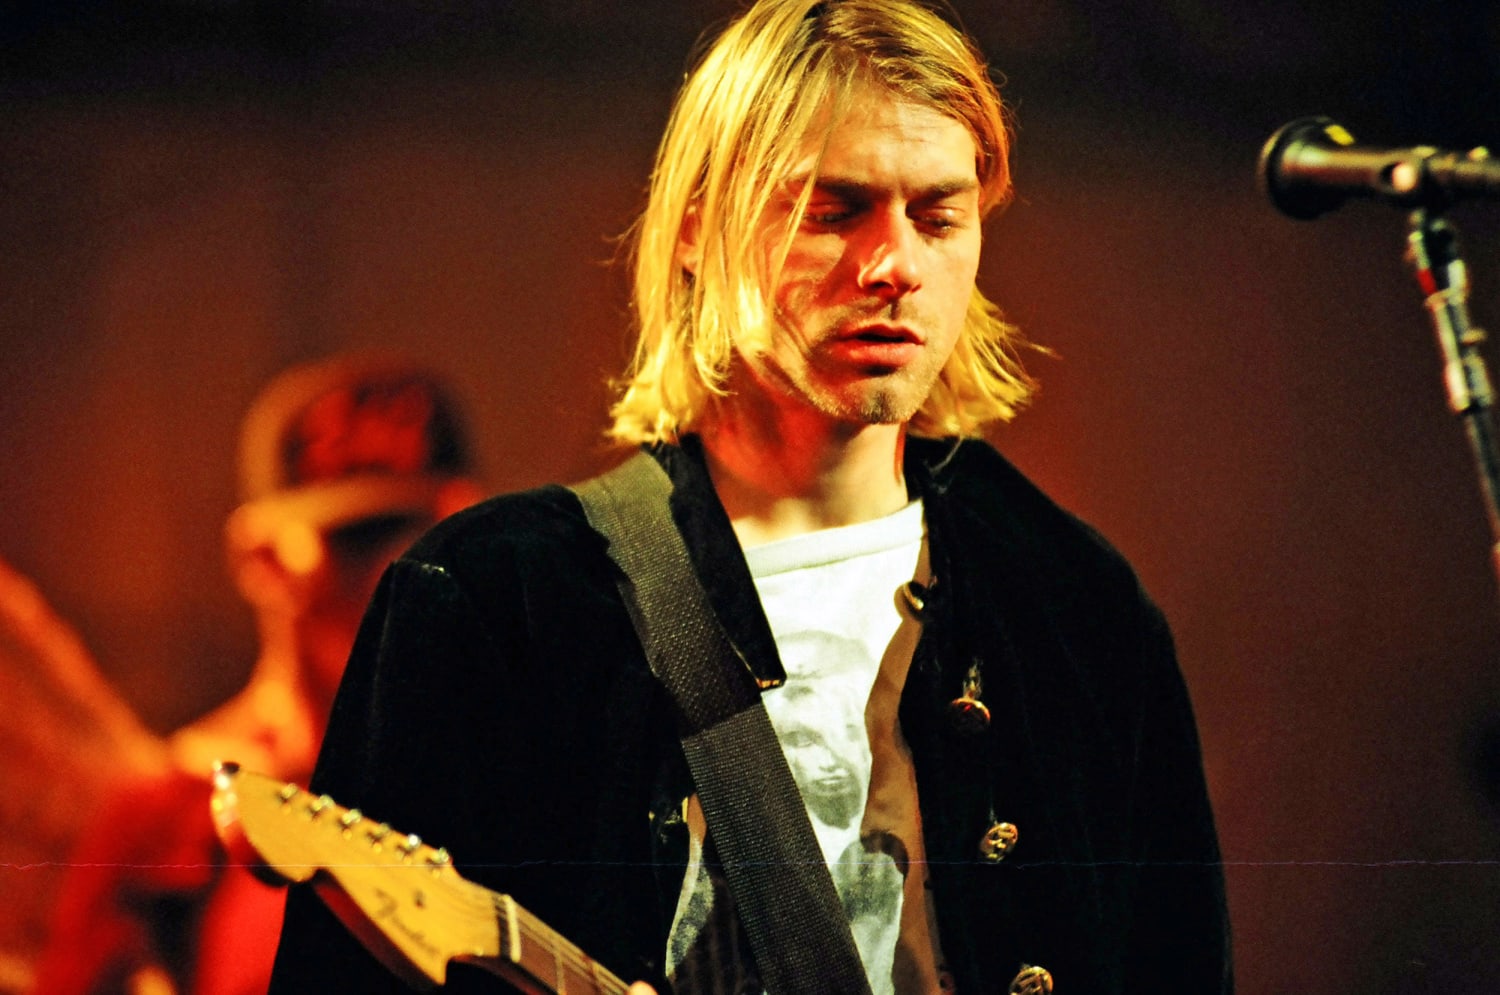 Kurt Cobain’s smashed Fender guitar sells for almost $600,000